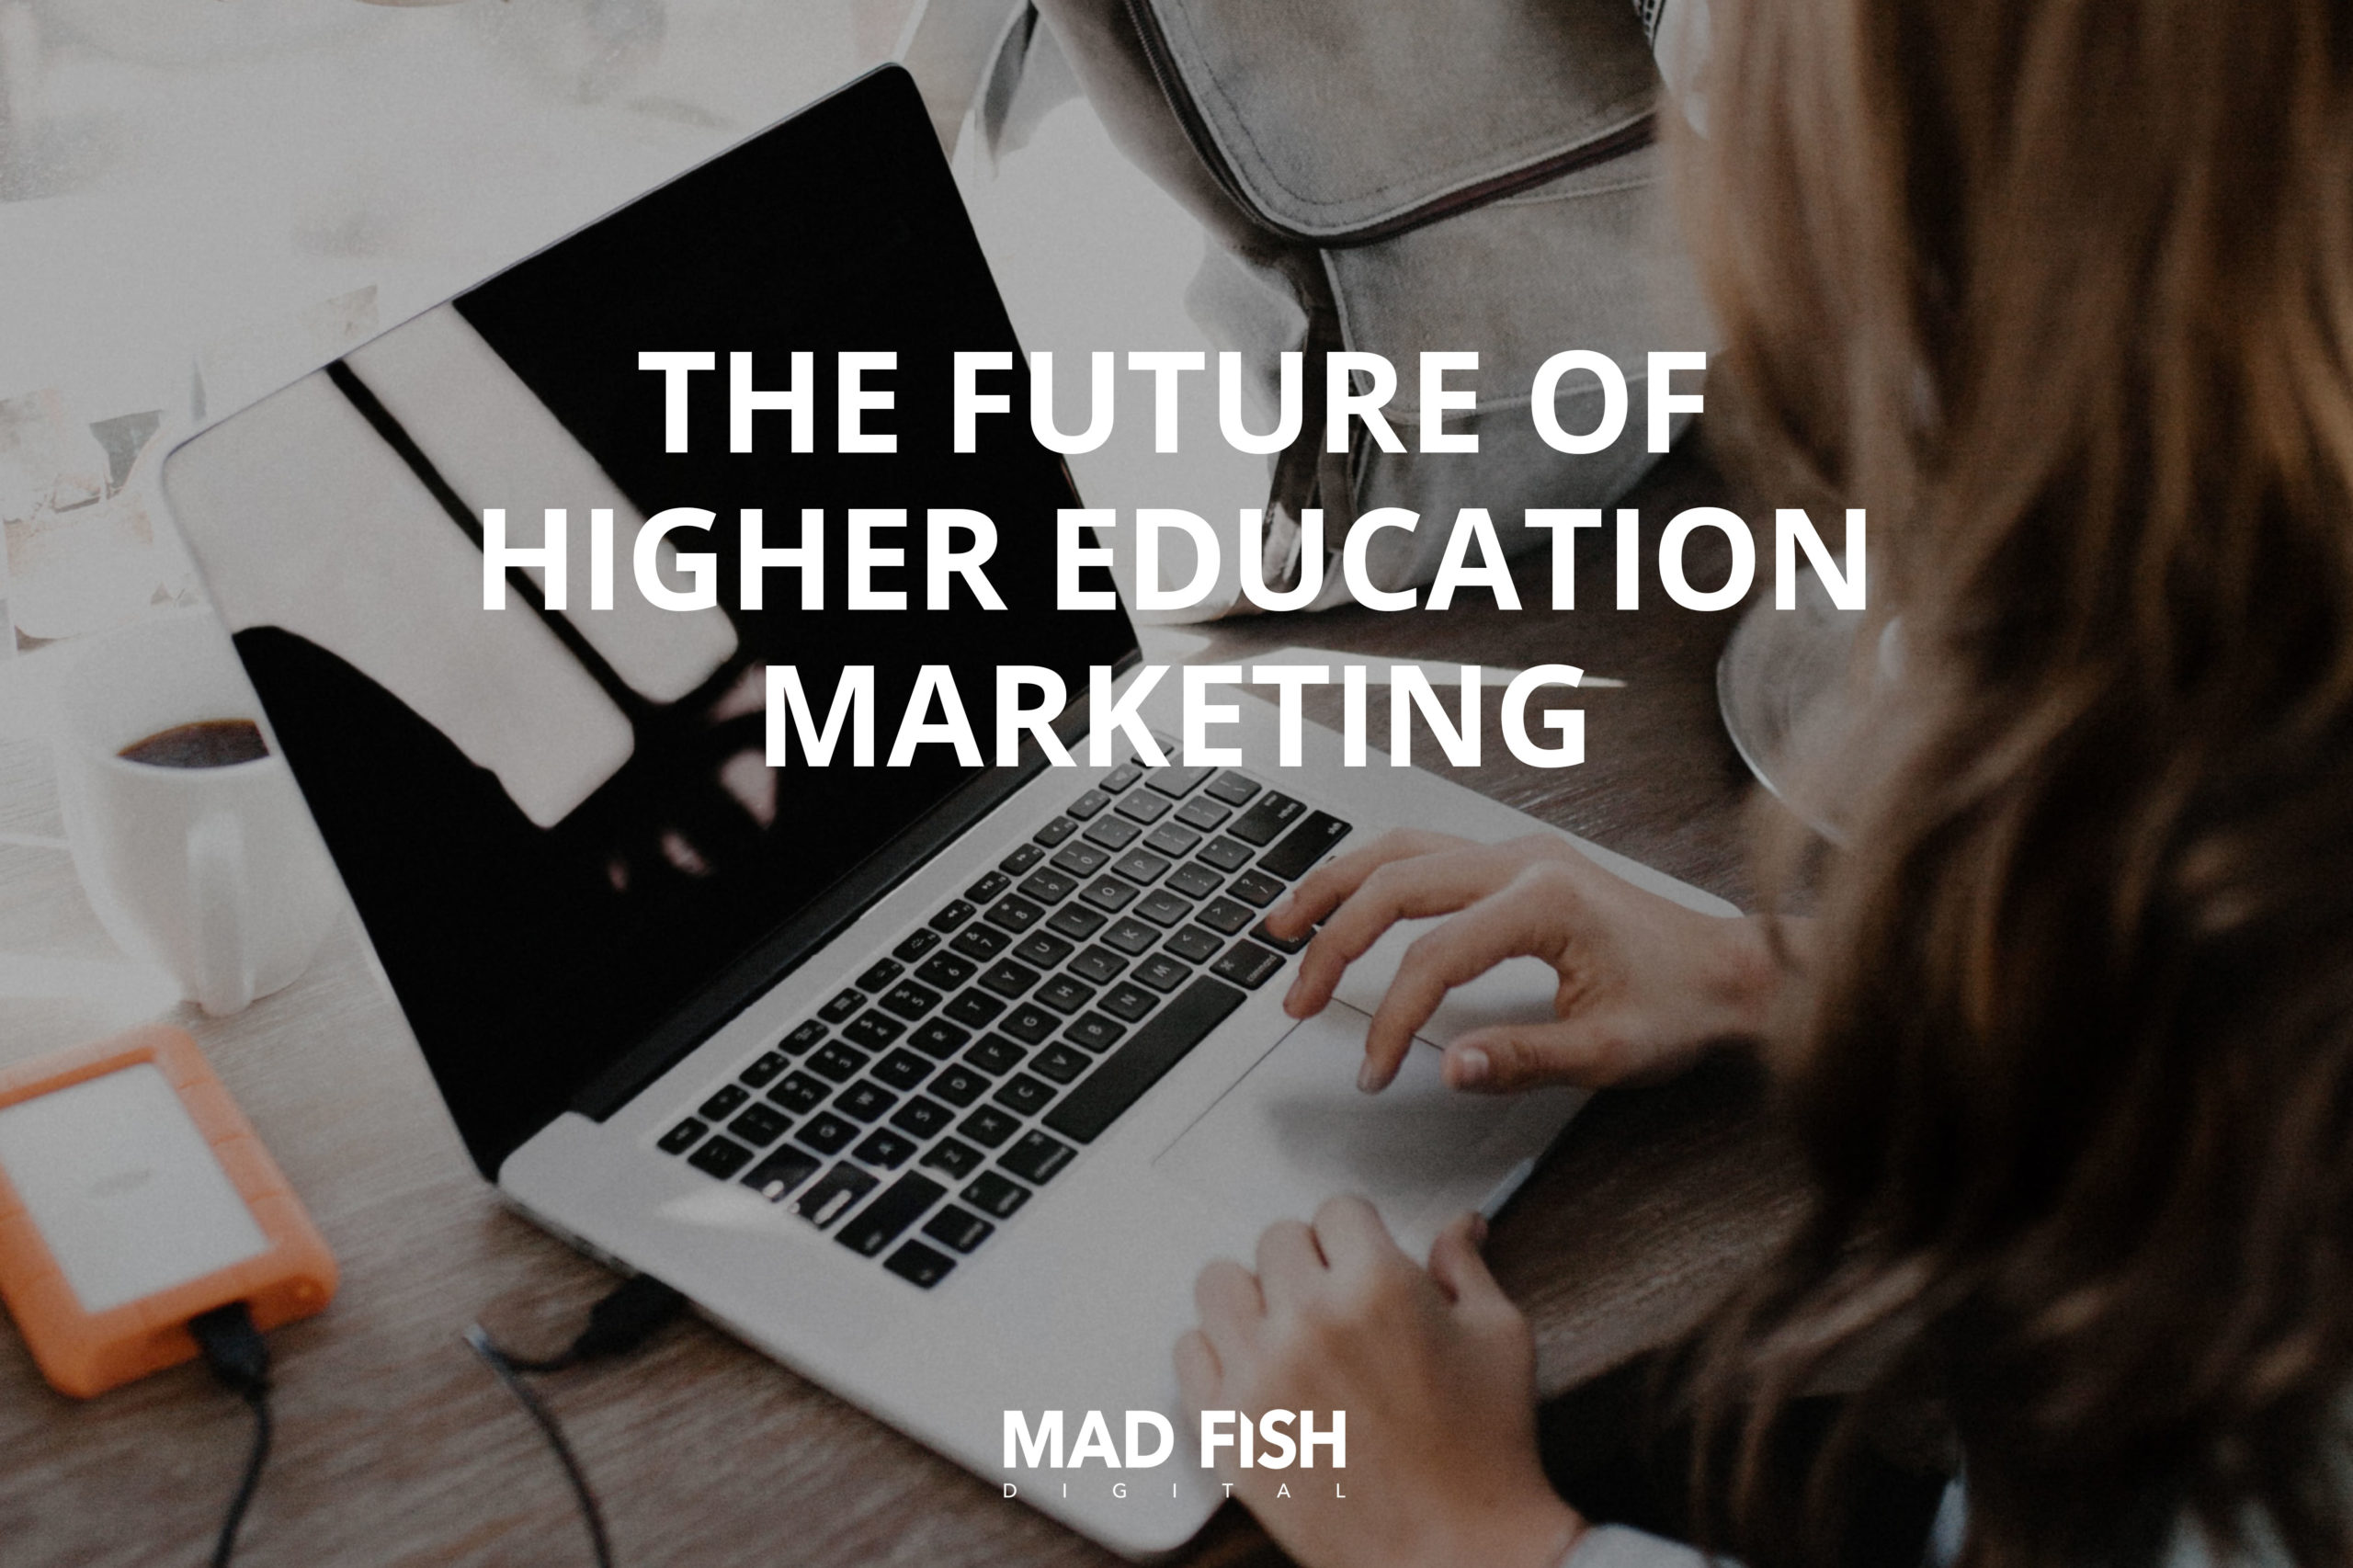 The Future of Higher Education Marketing Guide